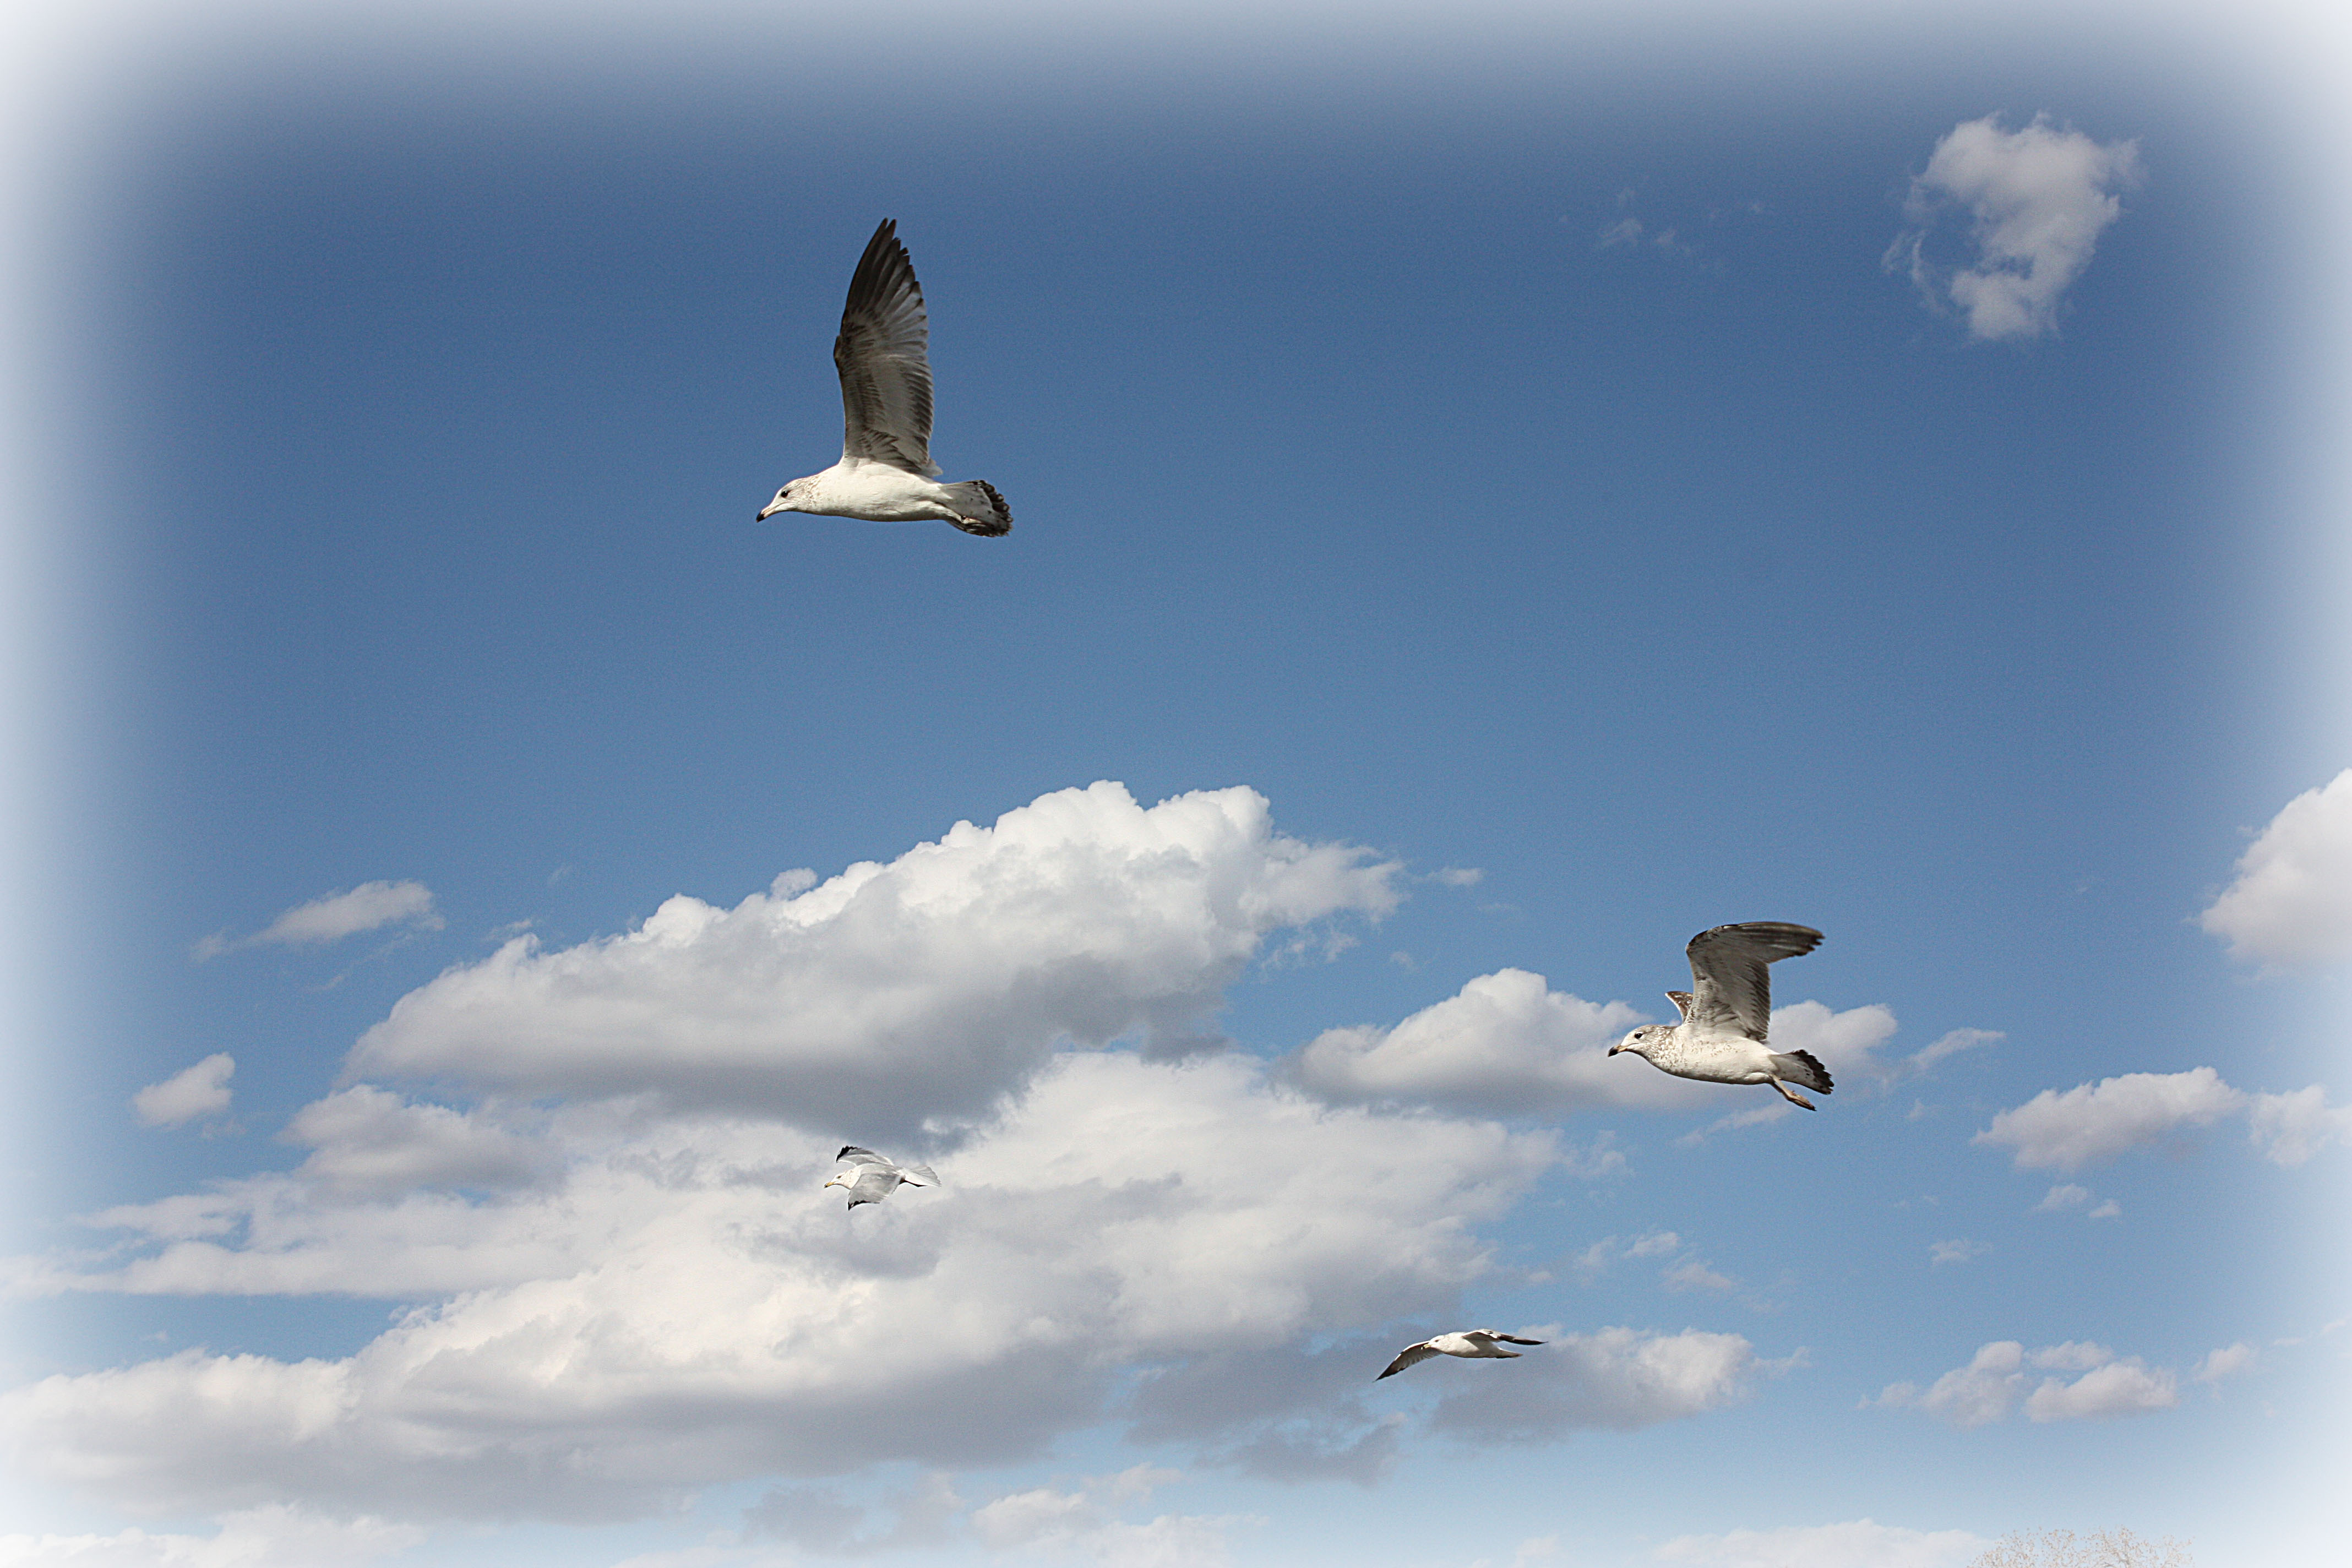 Seagulls at White Rock Lake in Dallas. | Photography | Pinterest ...